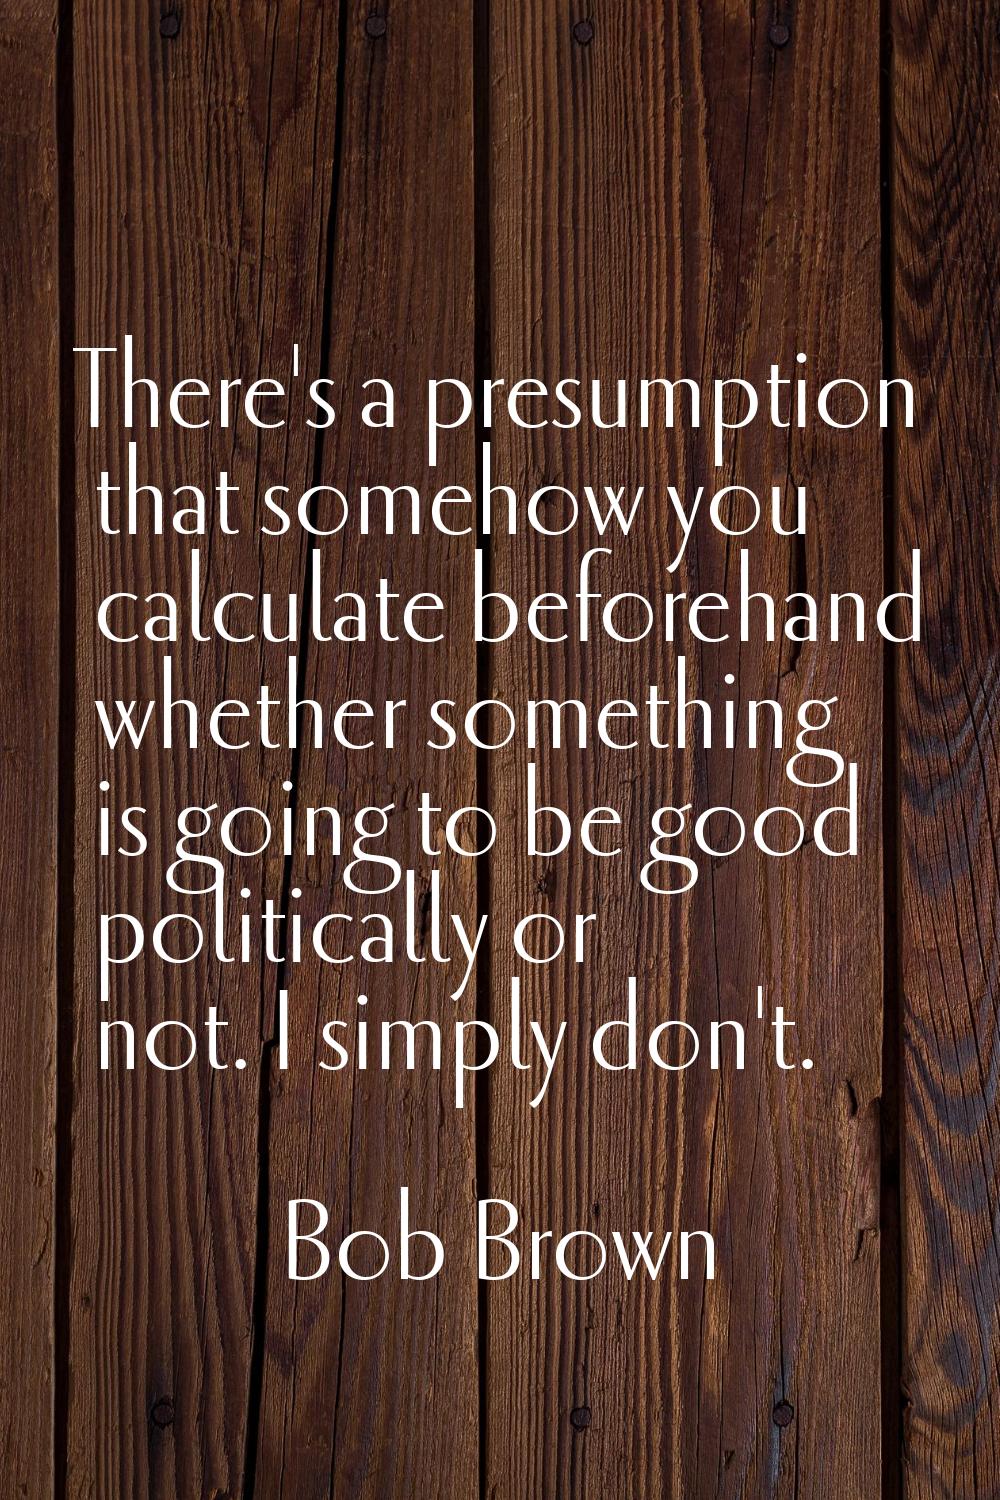 There's a presumption that somehow you calculate beforehand whether something is going to be good p